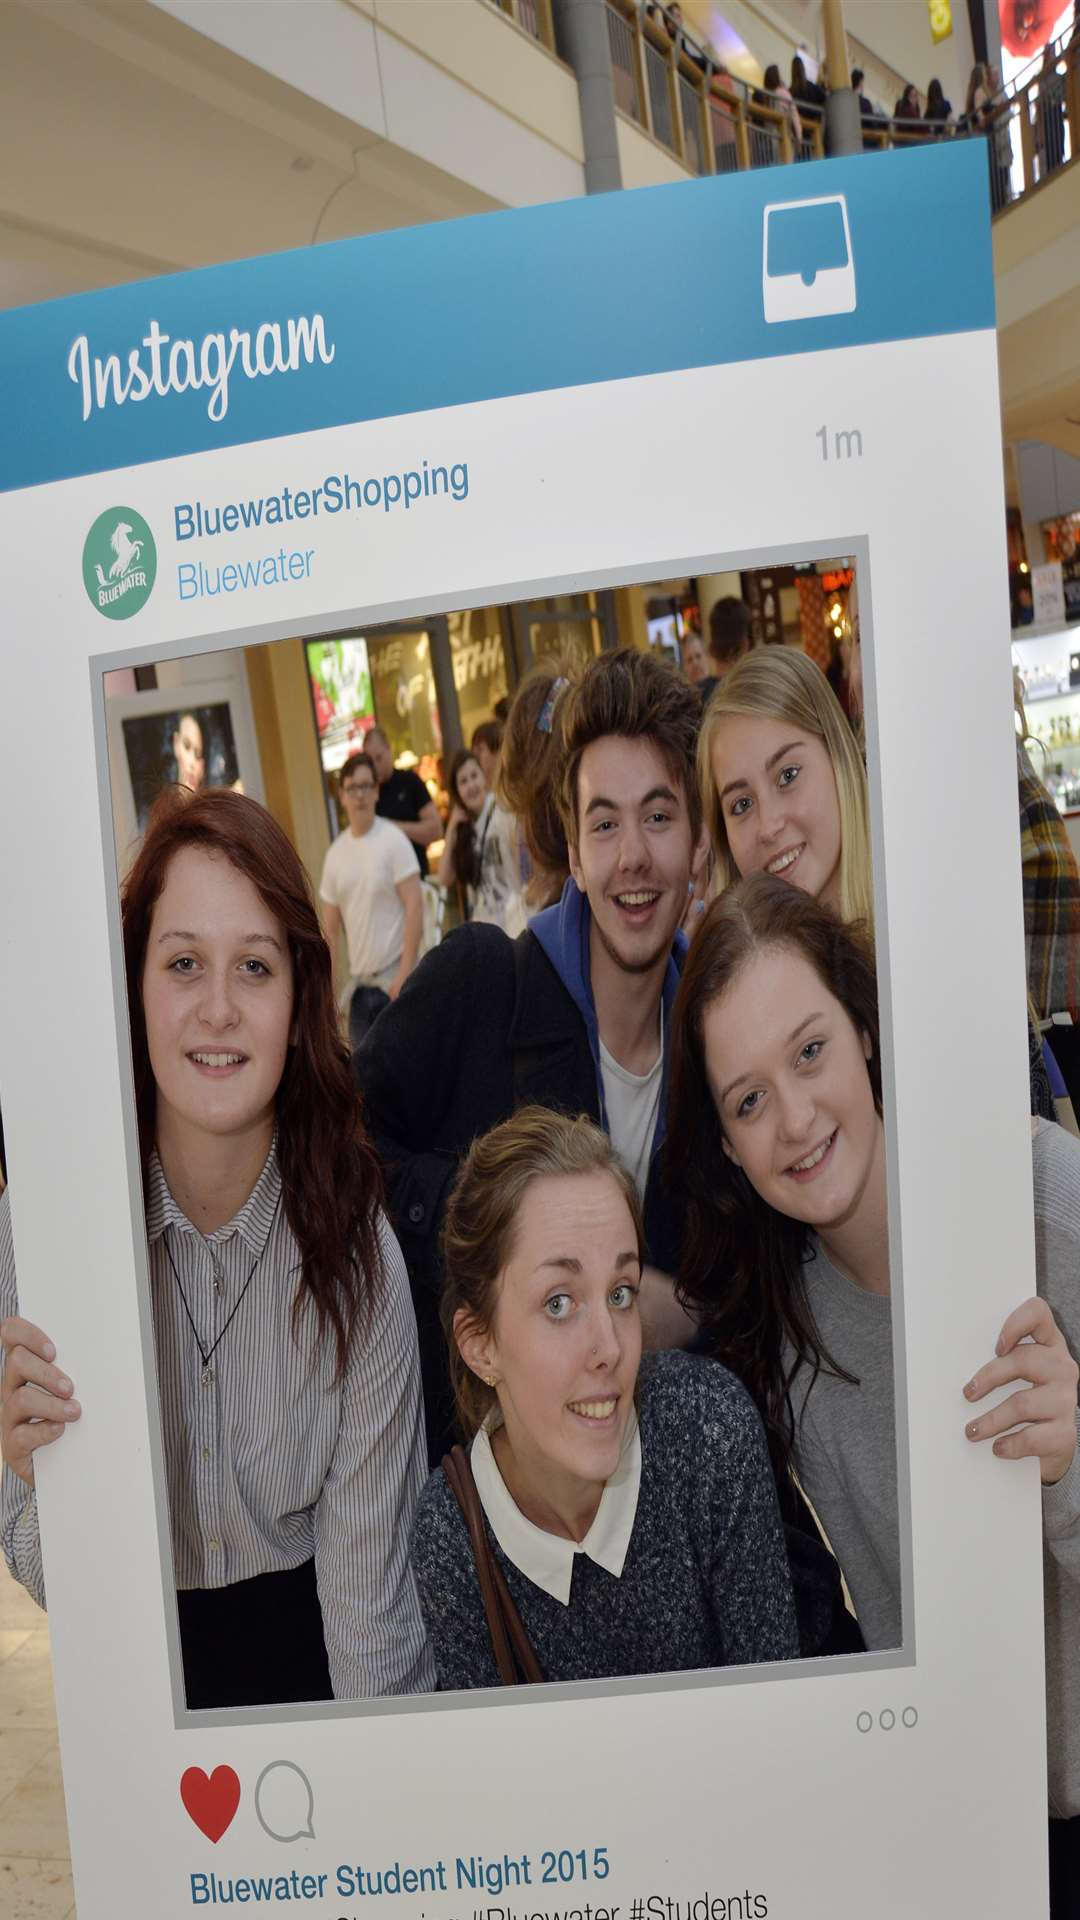 Fun pictures at Bluewater's student night